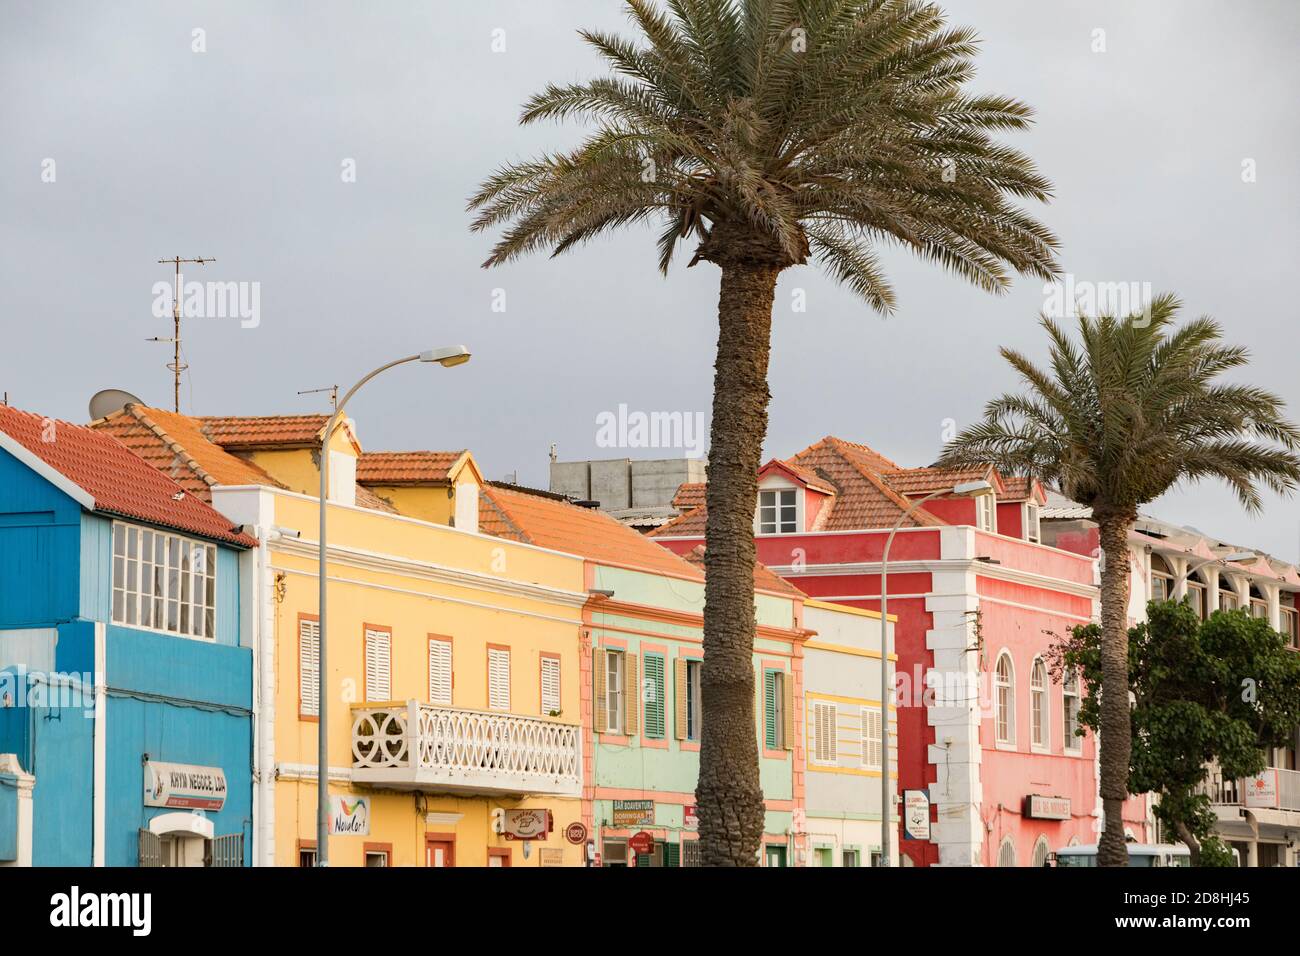 The vibrant city of Mindelo, Sao Vicente, Cape Verde is marked by colorful buildings and colonial architecture. Stock Photo